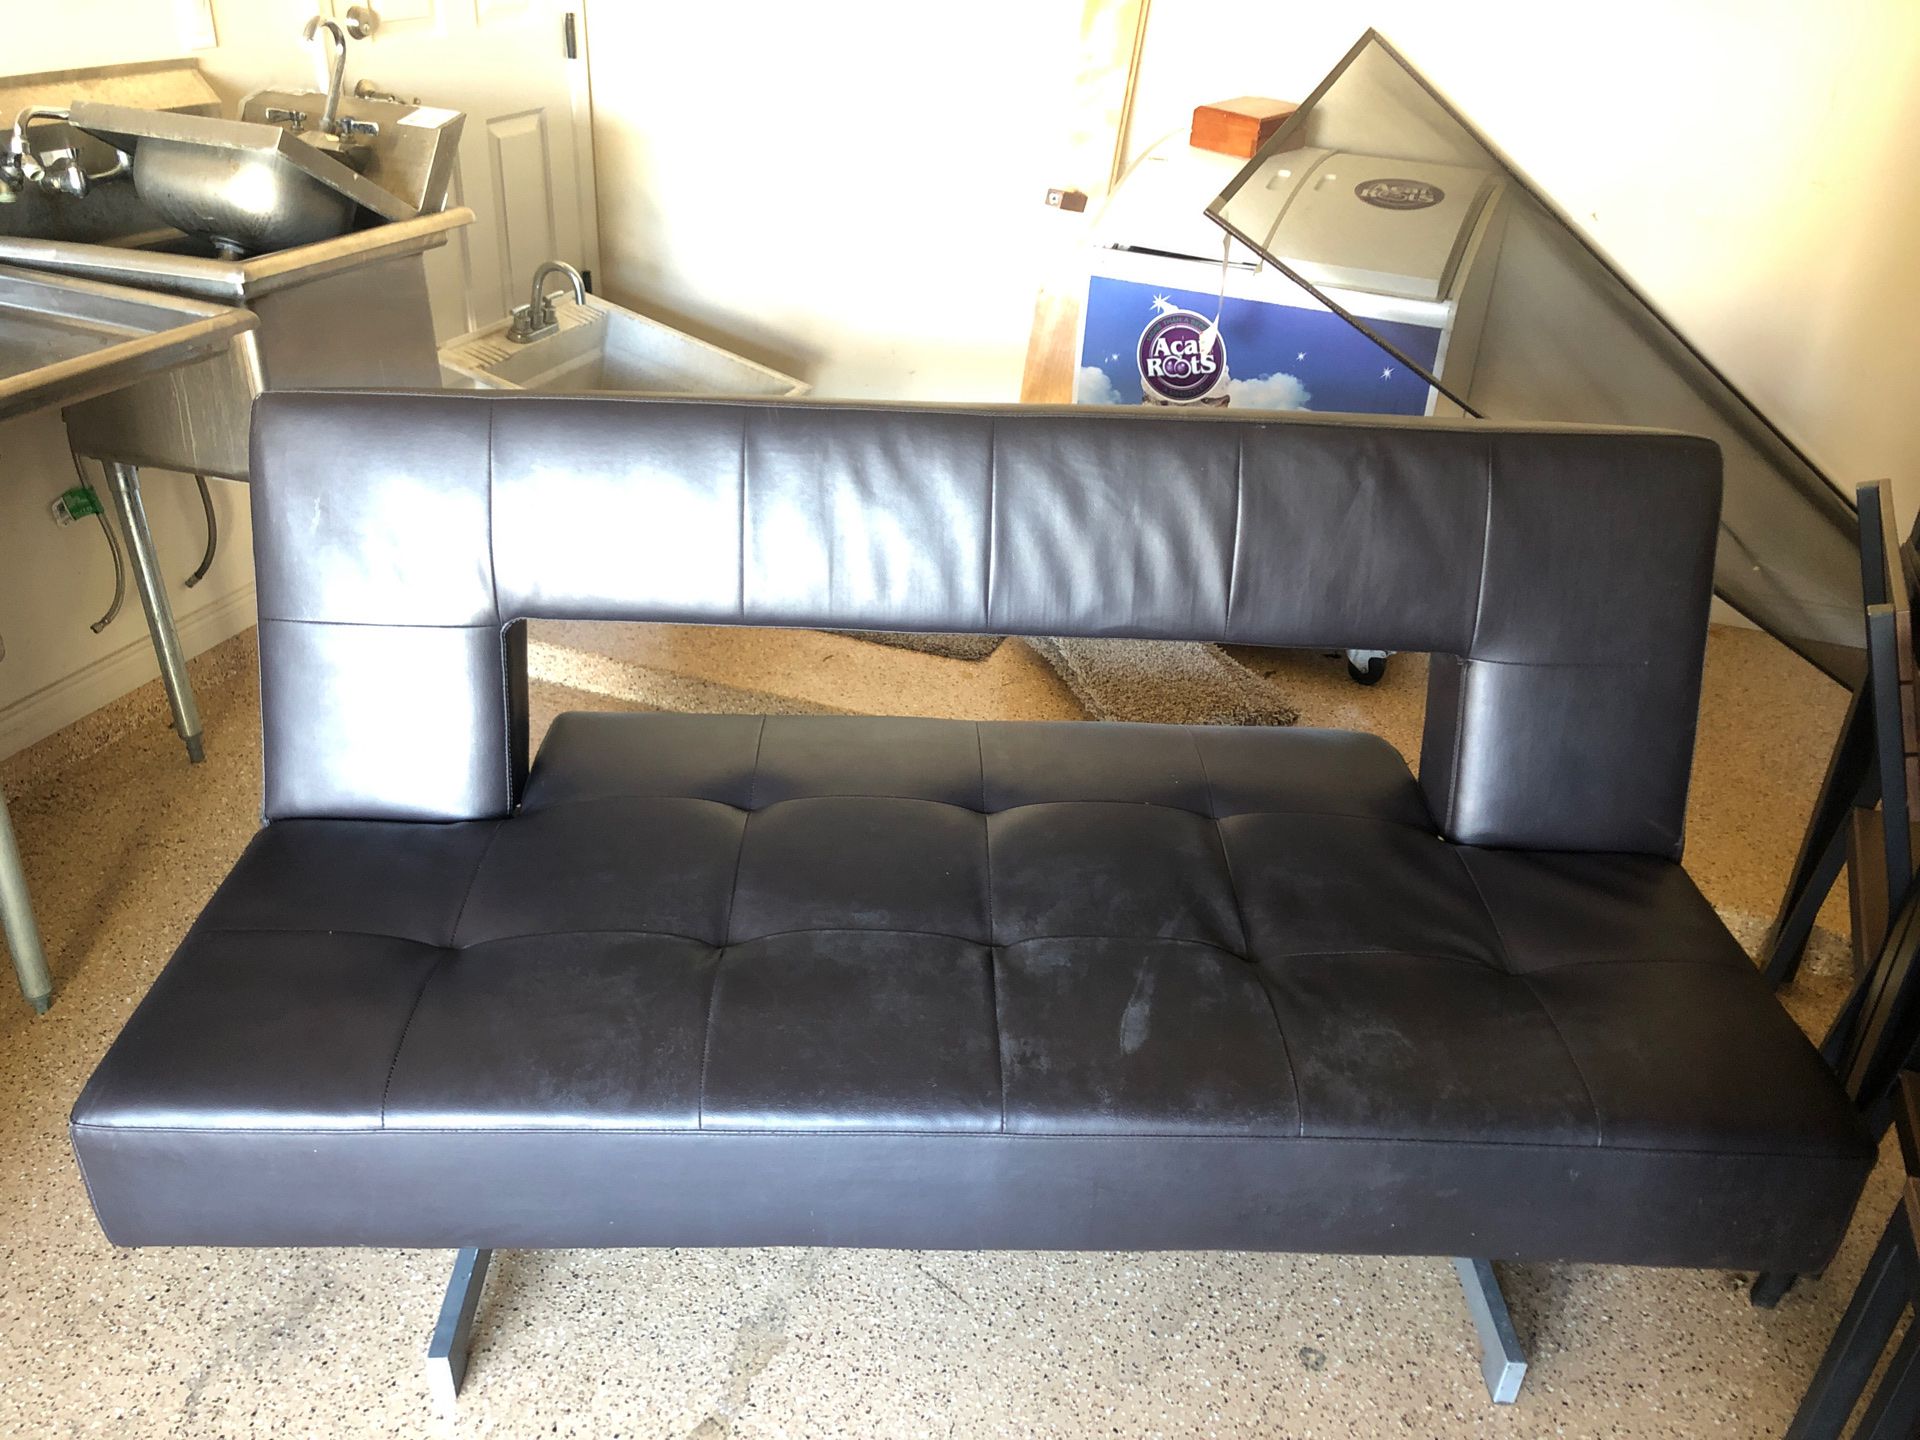 IKEA leather futon couch set up